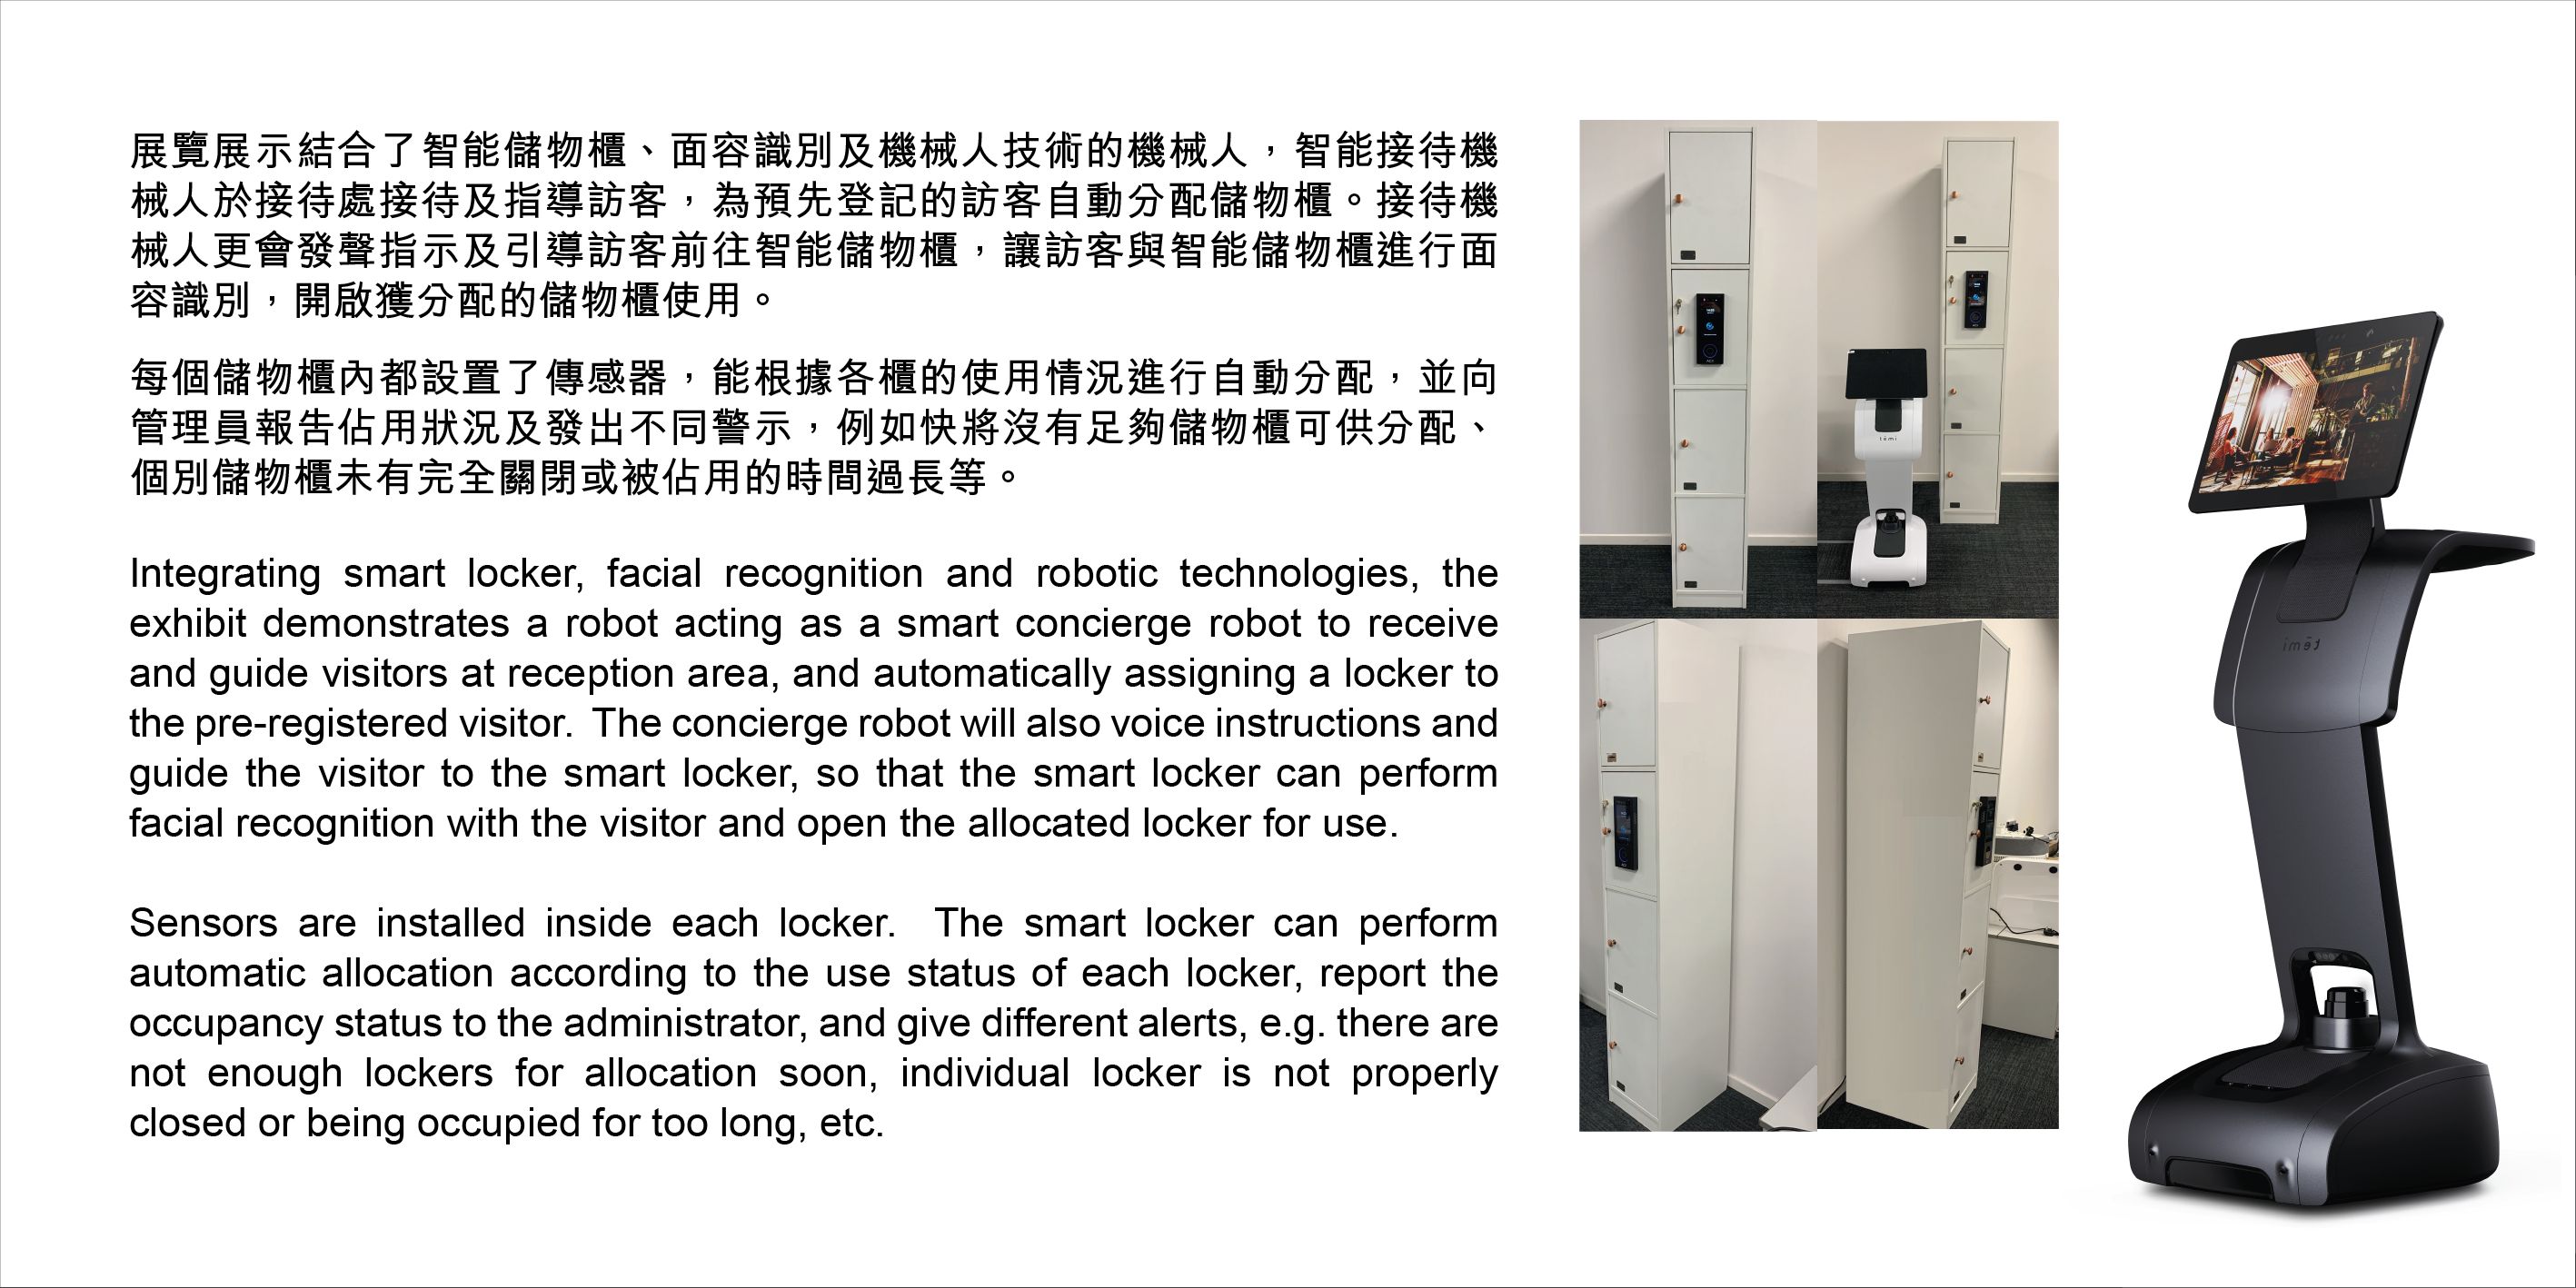 Integrating smart locker, facial recognition and robotic technologies, theexhibit demonstrates a robot acting as a smart concierge robot to receive and guide visitors at reception area, and automatically assigning a locker to the pre-registered visitor.  The concierge robot will also voice instructions and guide the visitor to the smart locker, so that the smart locker can perform facial recognition with the visitor and open the allocated locker for use. Sensors are installed inside each locker.  The smart locker can performautomatic allocation according to the use status of each locker, report theoccupancy status to the administrator, and give different alerts, e.g. there are not enough lockers for allocation soon, individual locker is not properly closed or being occupied for too long, etc.